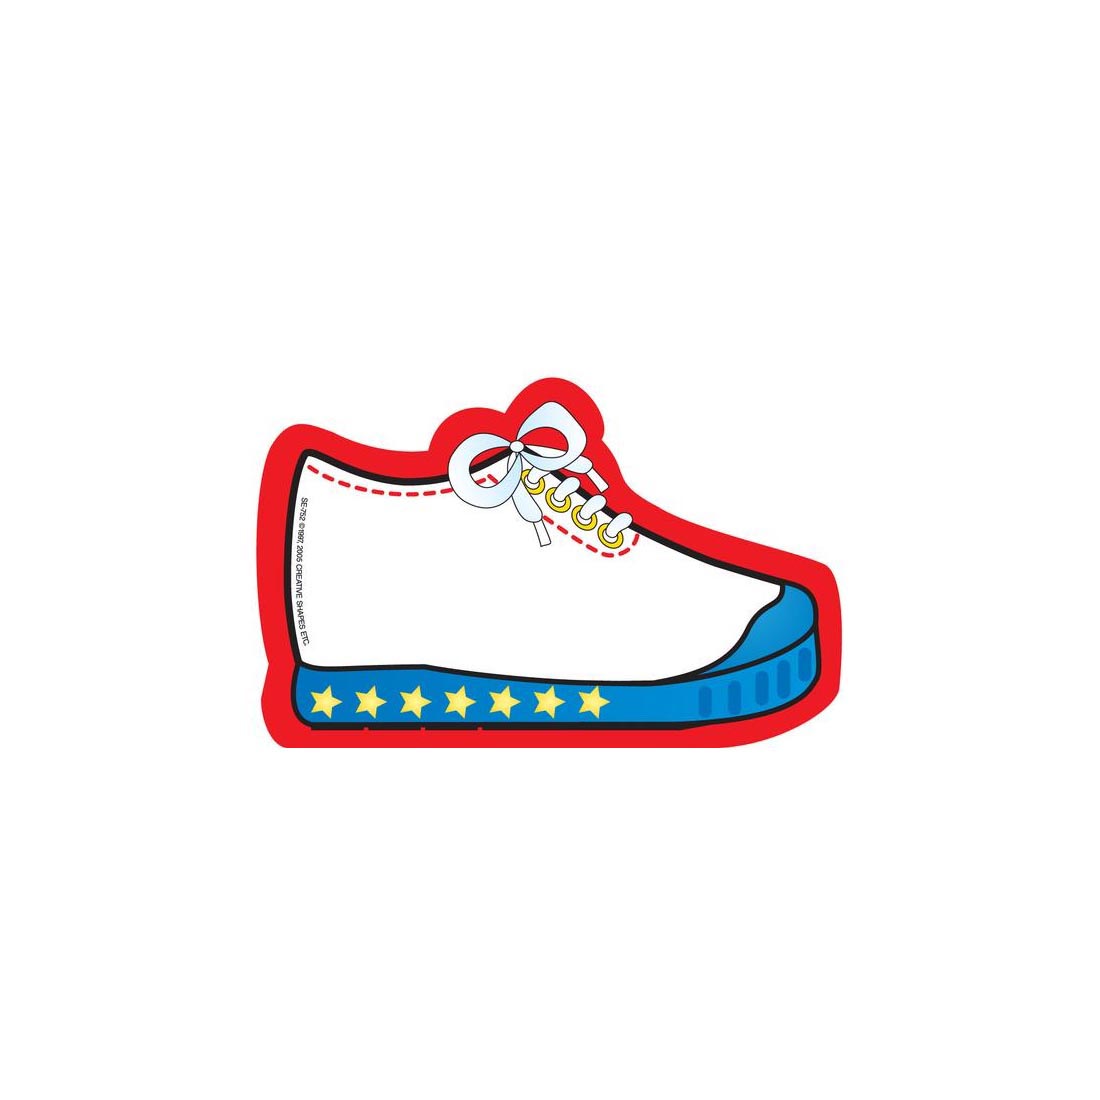 Sneaker Notepad by Creative Shapes